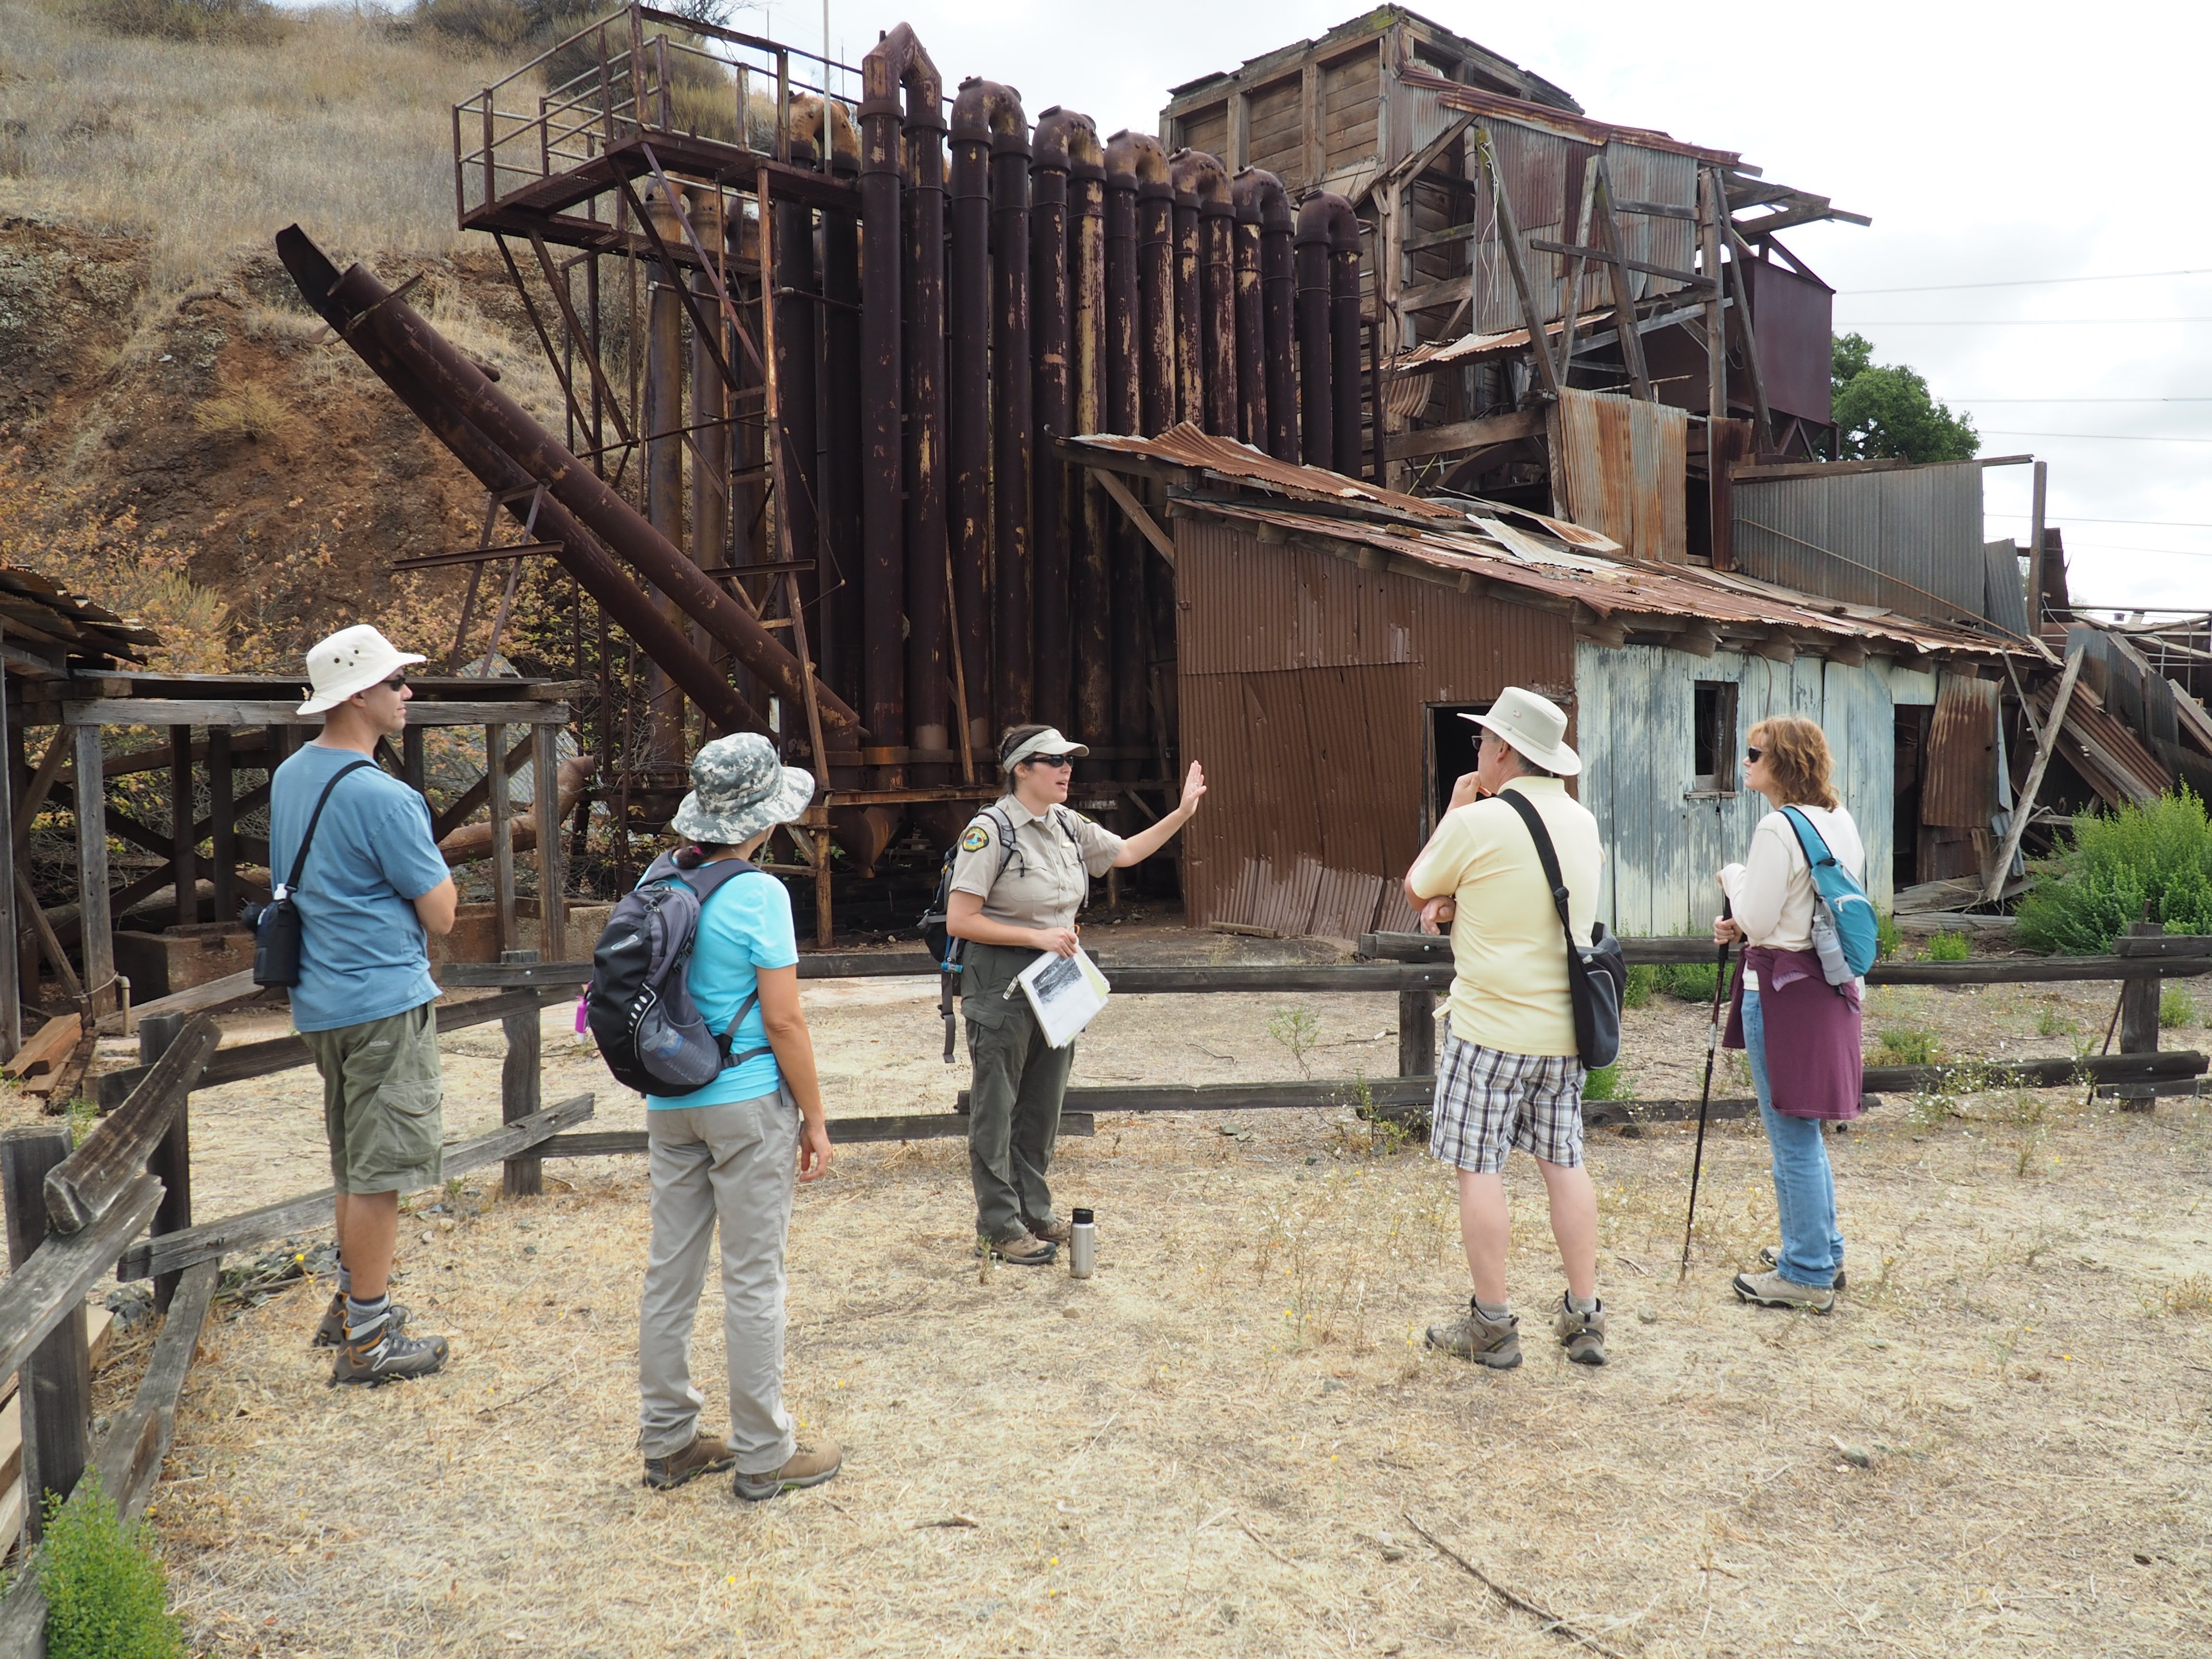 Park intepreter talks with program participants in front of furnace within Almaden Quicksilver County Park